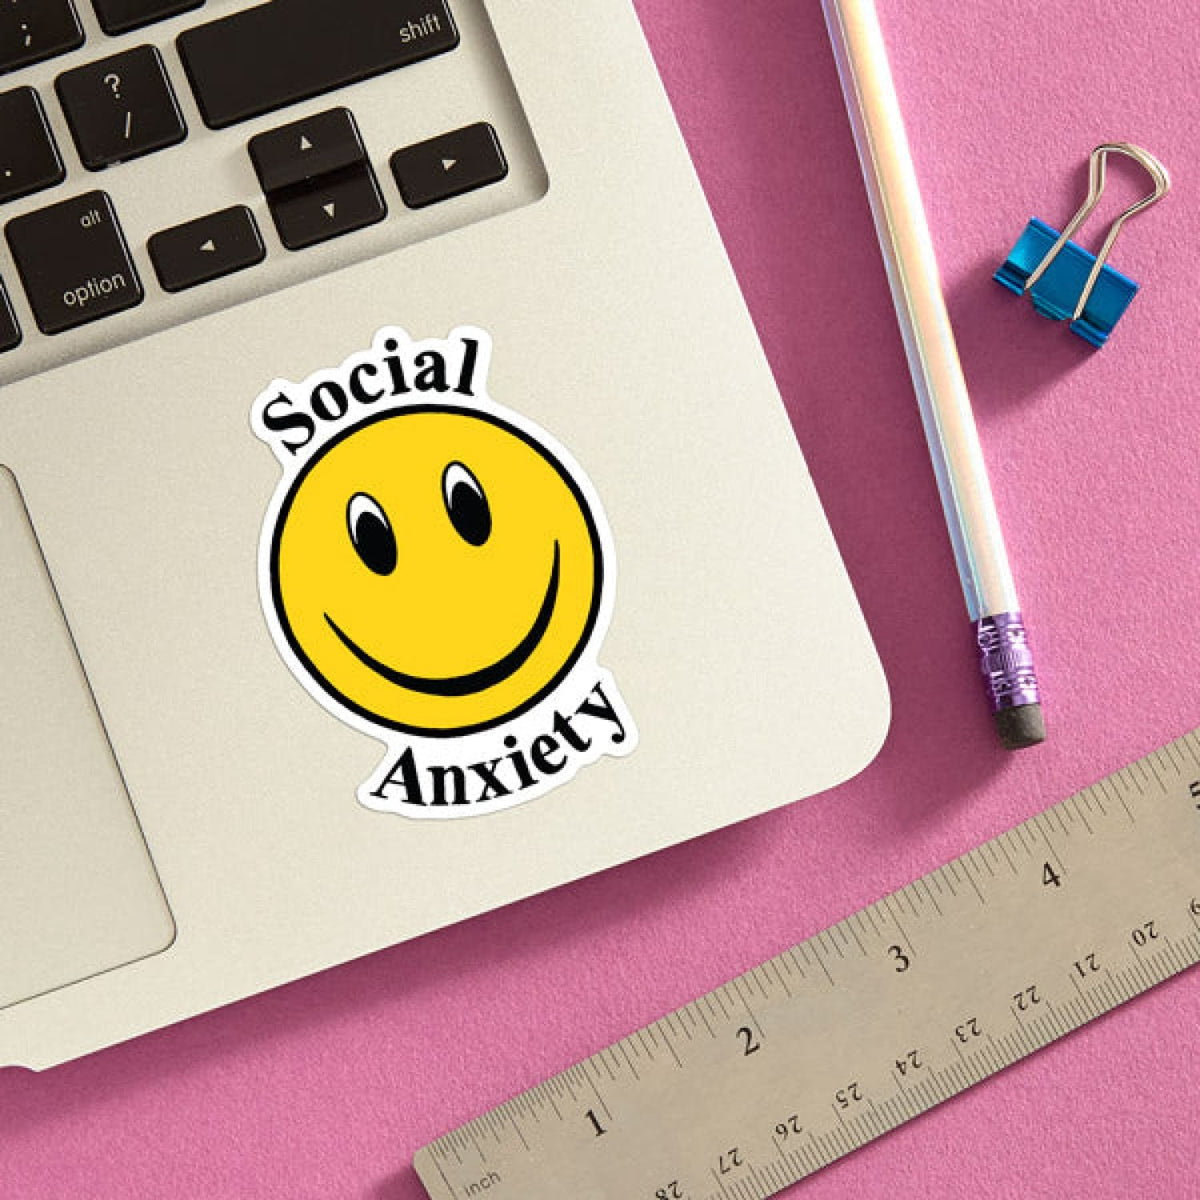 Social Anxiety Smiley Face Sticker 90s Baby - Anxiety -